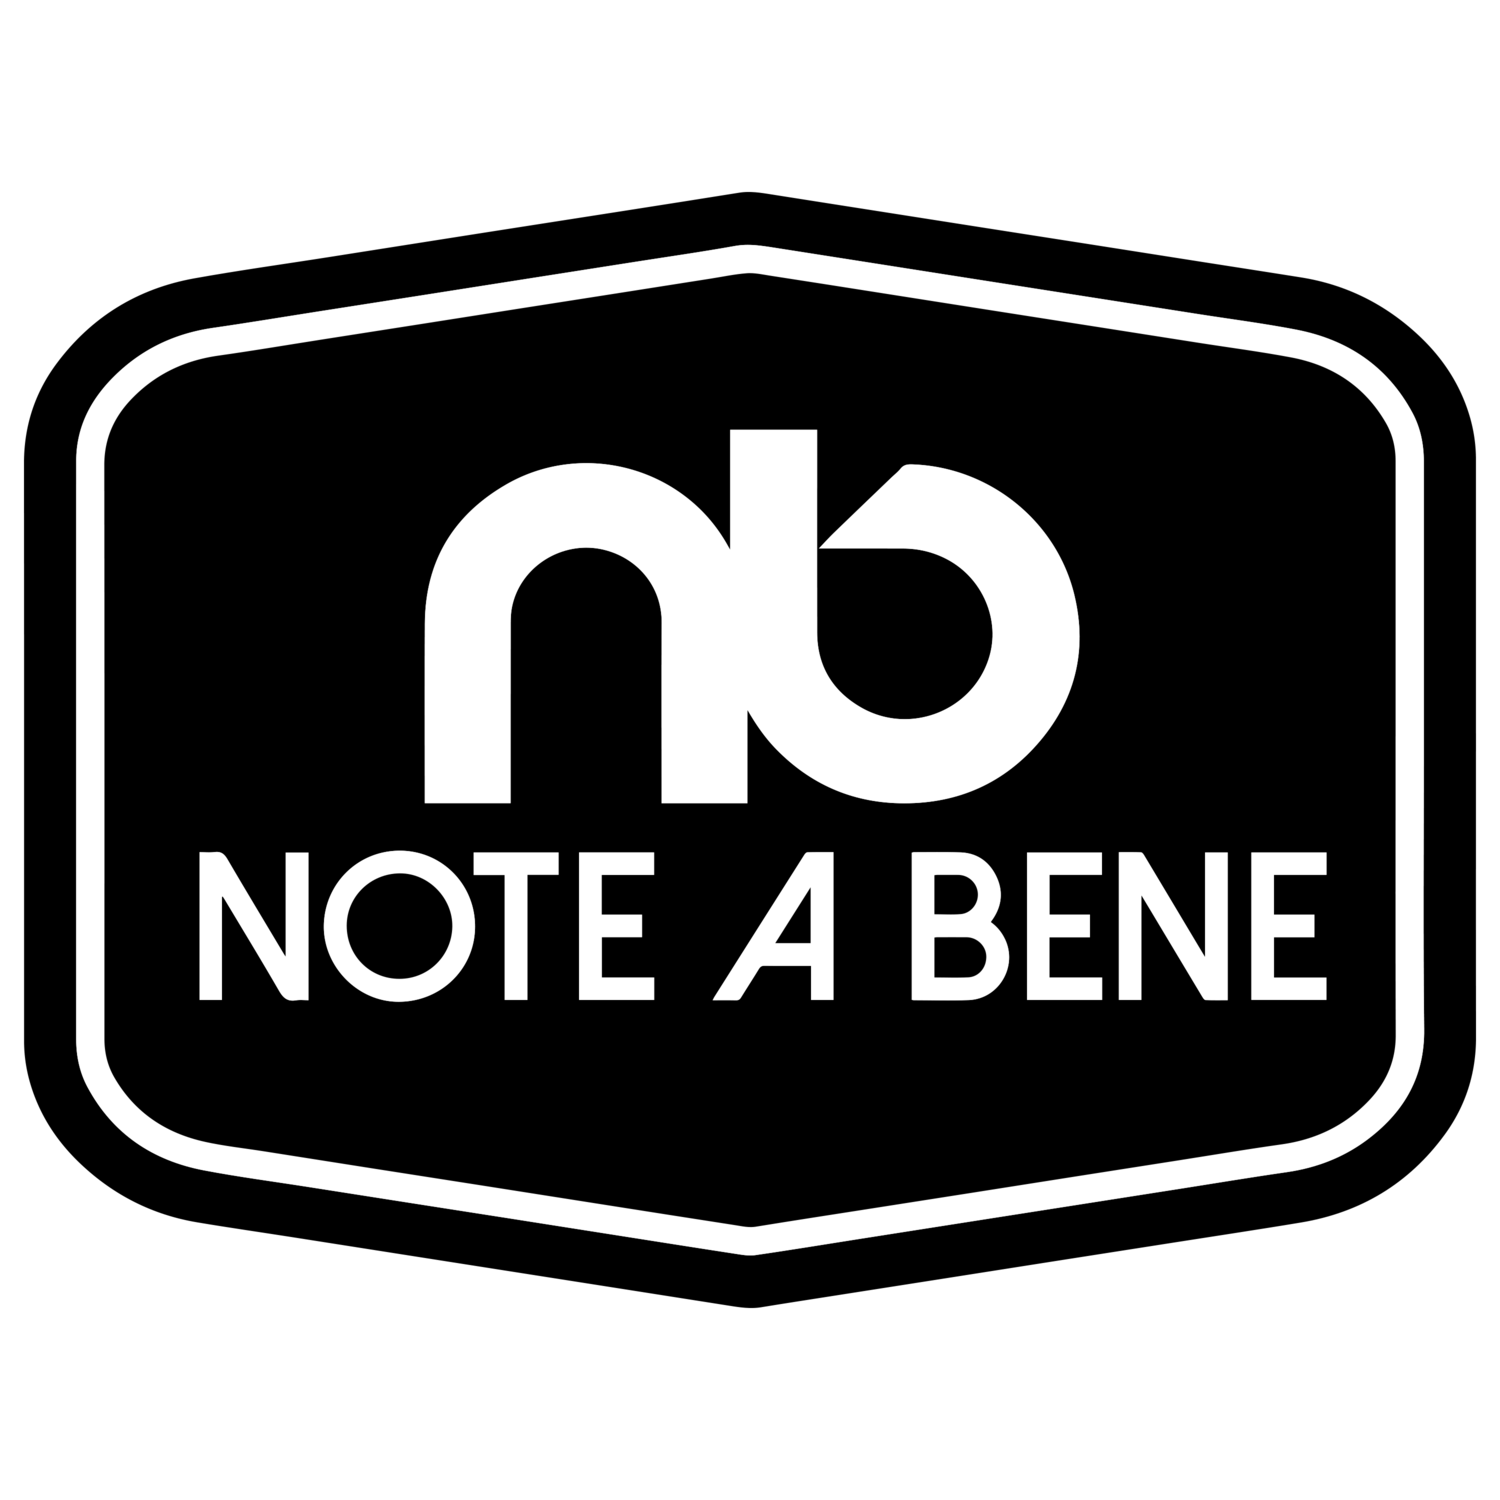 LABEL NOTE A BENE